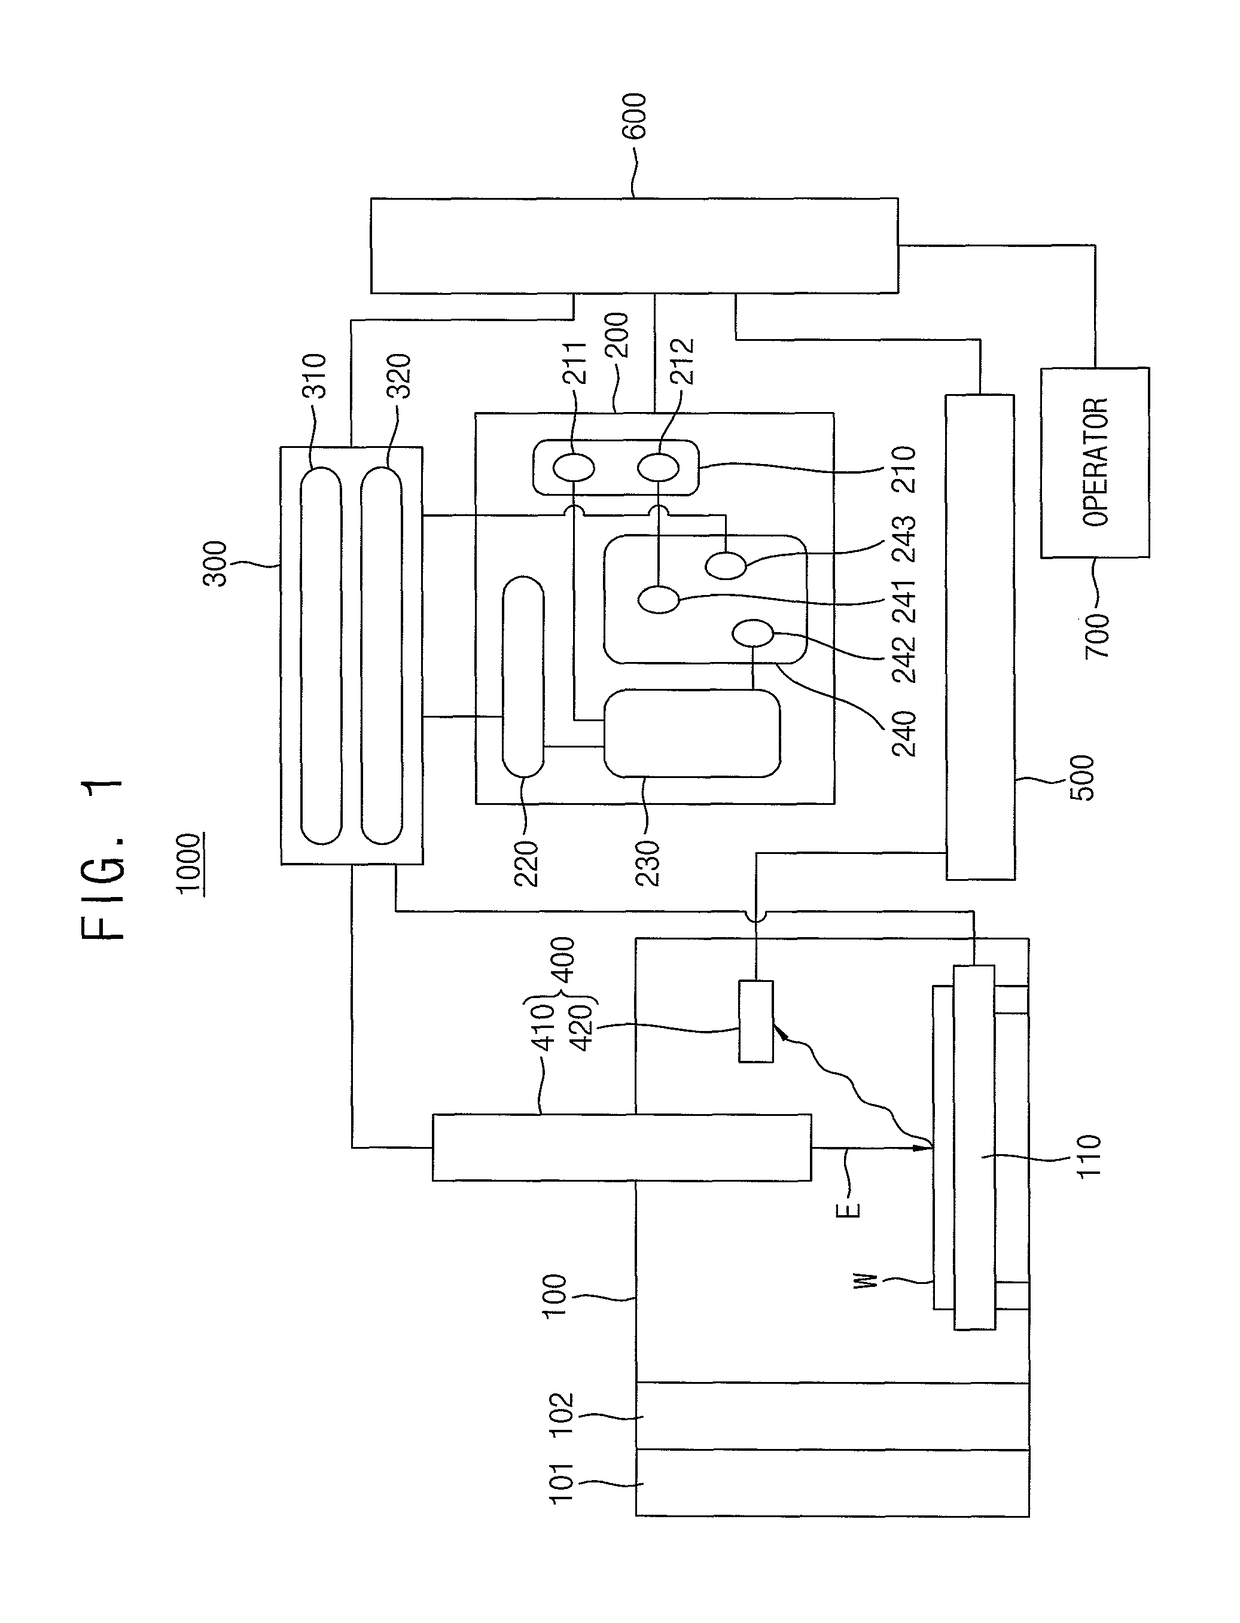 Defect imaging apparatus, defect detection system having the same, and method of detecting defects using the same